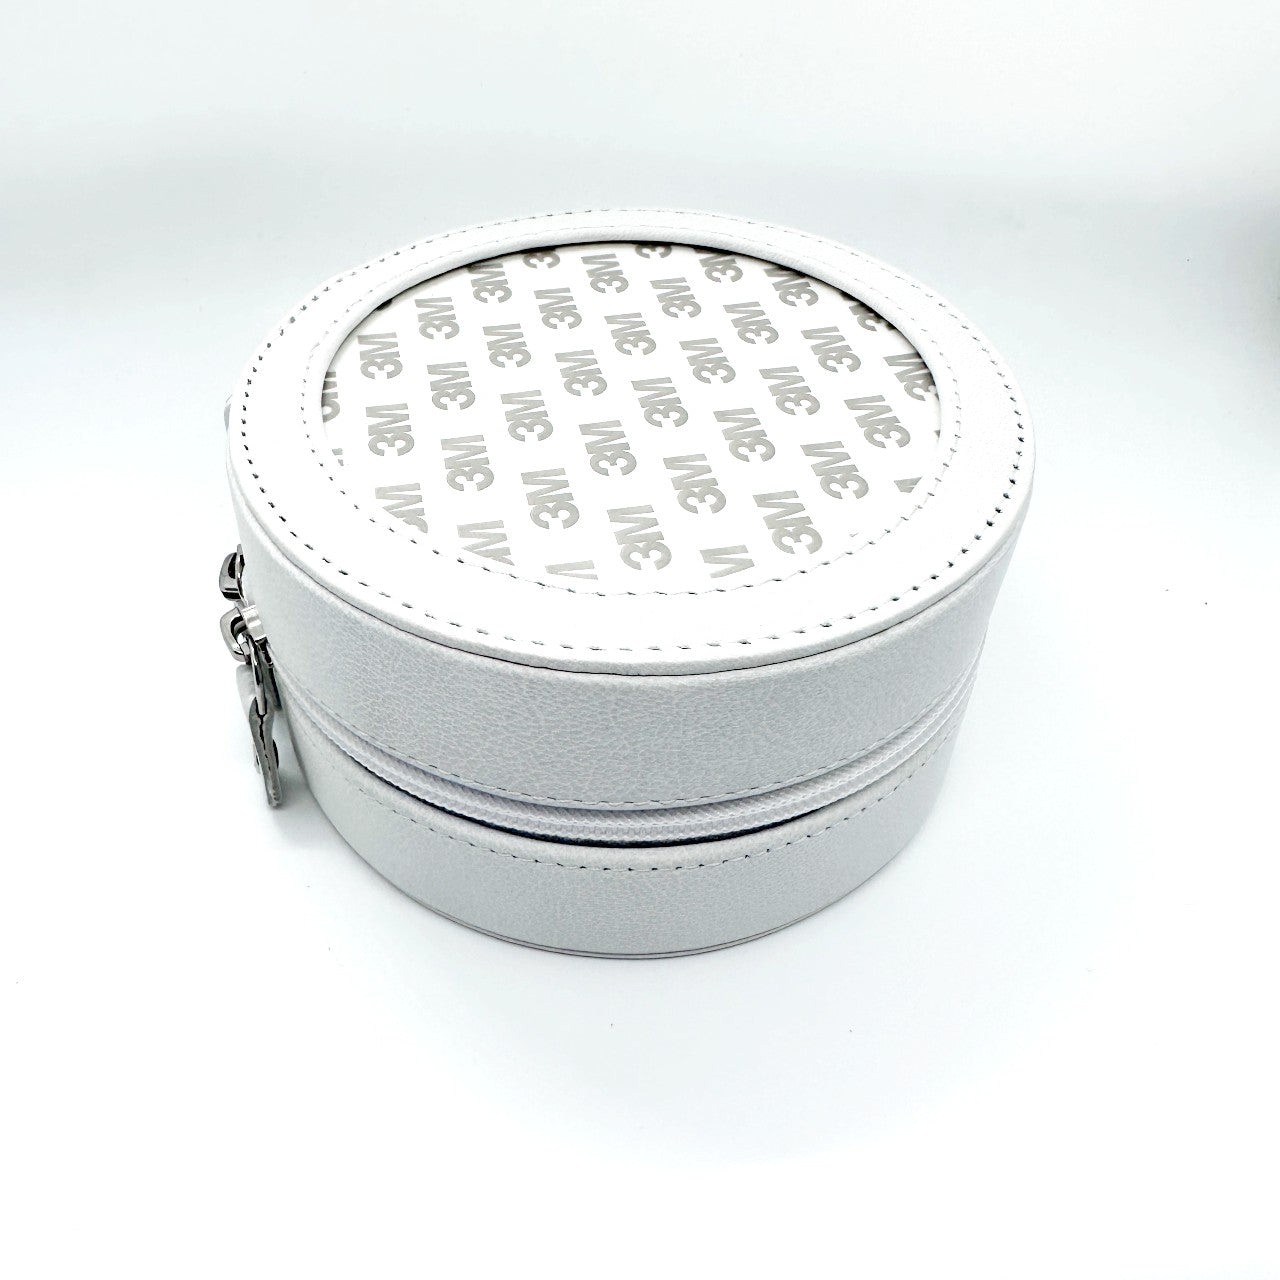 Round white leather box for needlepoint insert as a self-finishing project.